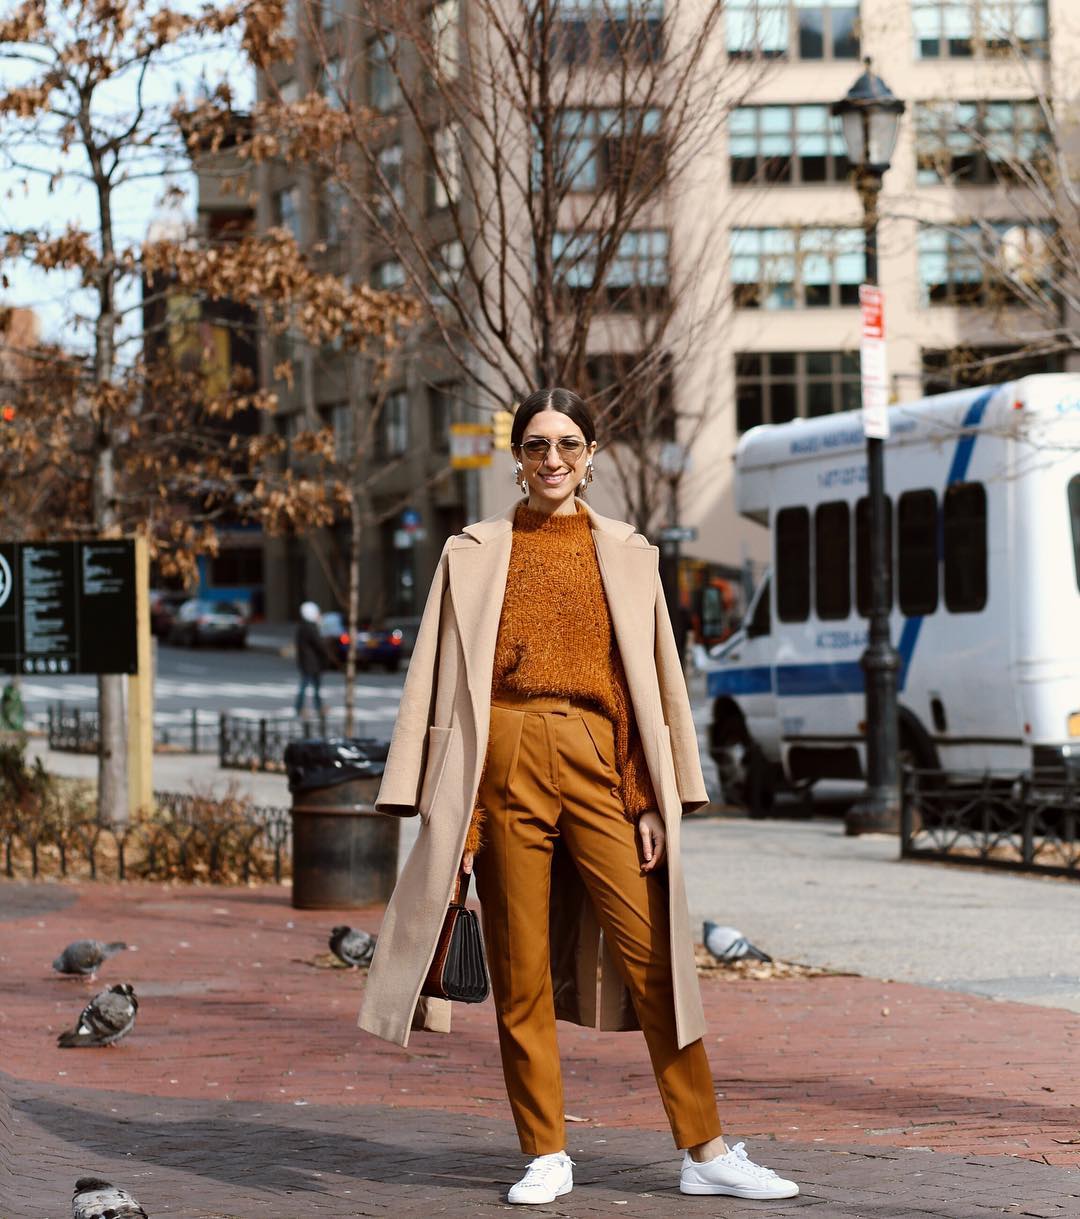 This Street Style Outfit Is so on Trend for Fall 2019